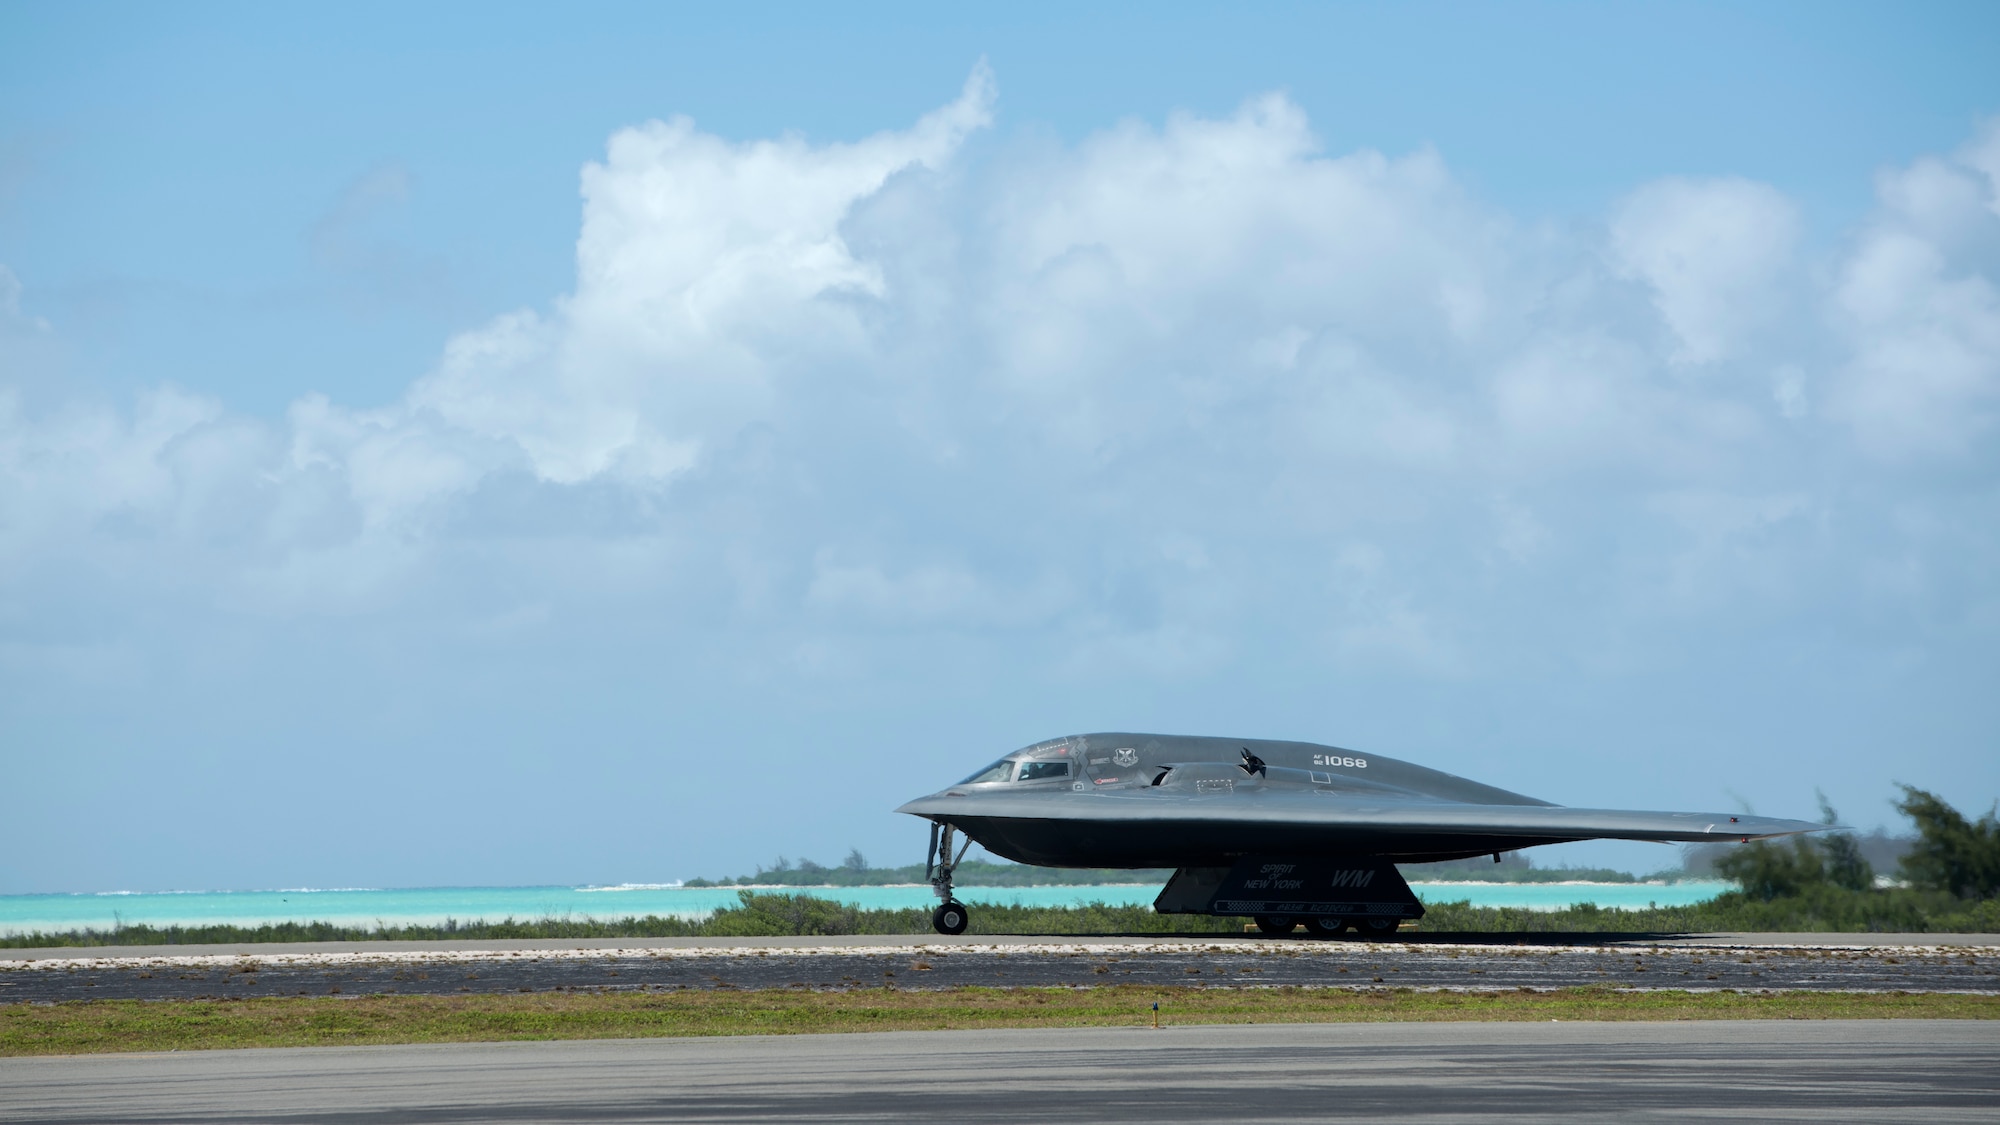 A U.S. Air Force B-2 Spirit deployed from Whiteman Air Force Base, Missouri, taxis at Wake Island Airfield Sept. 14, 2018.